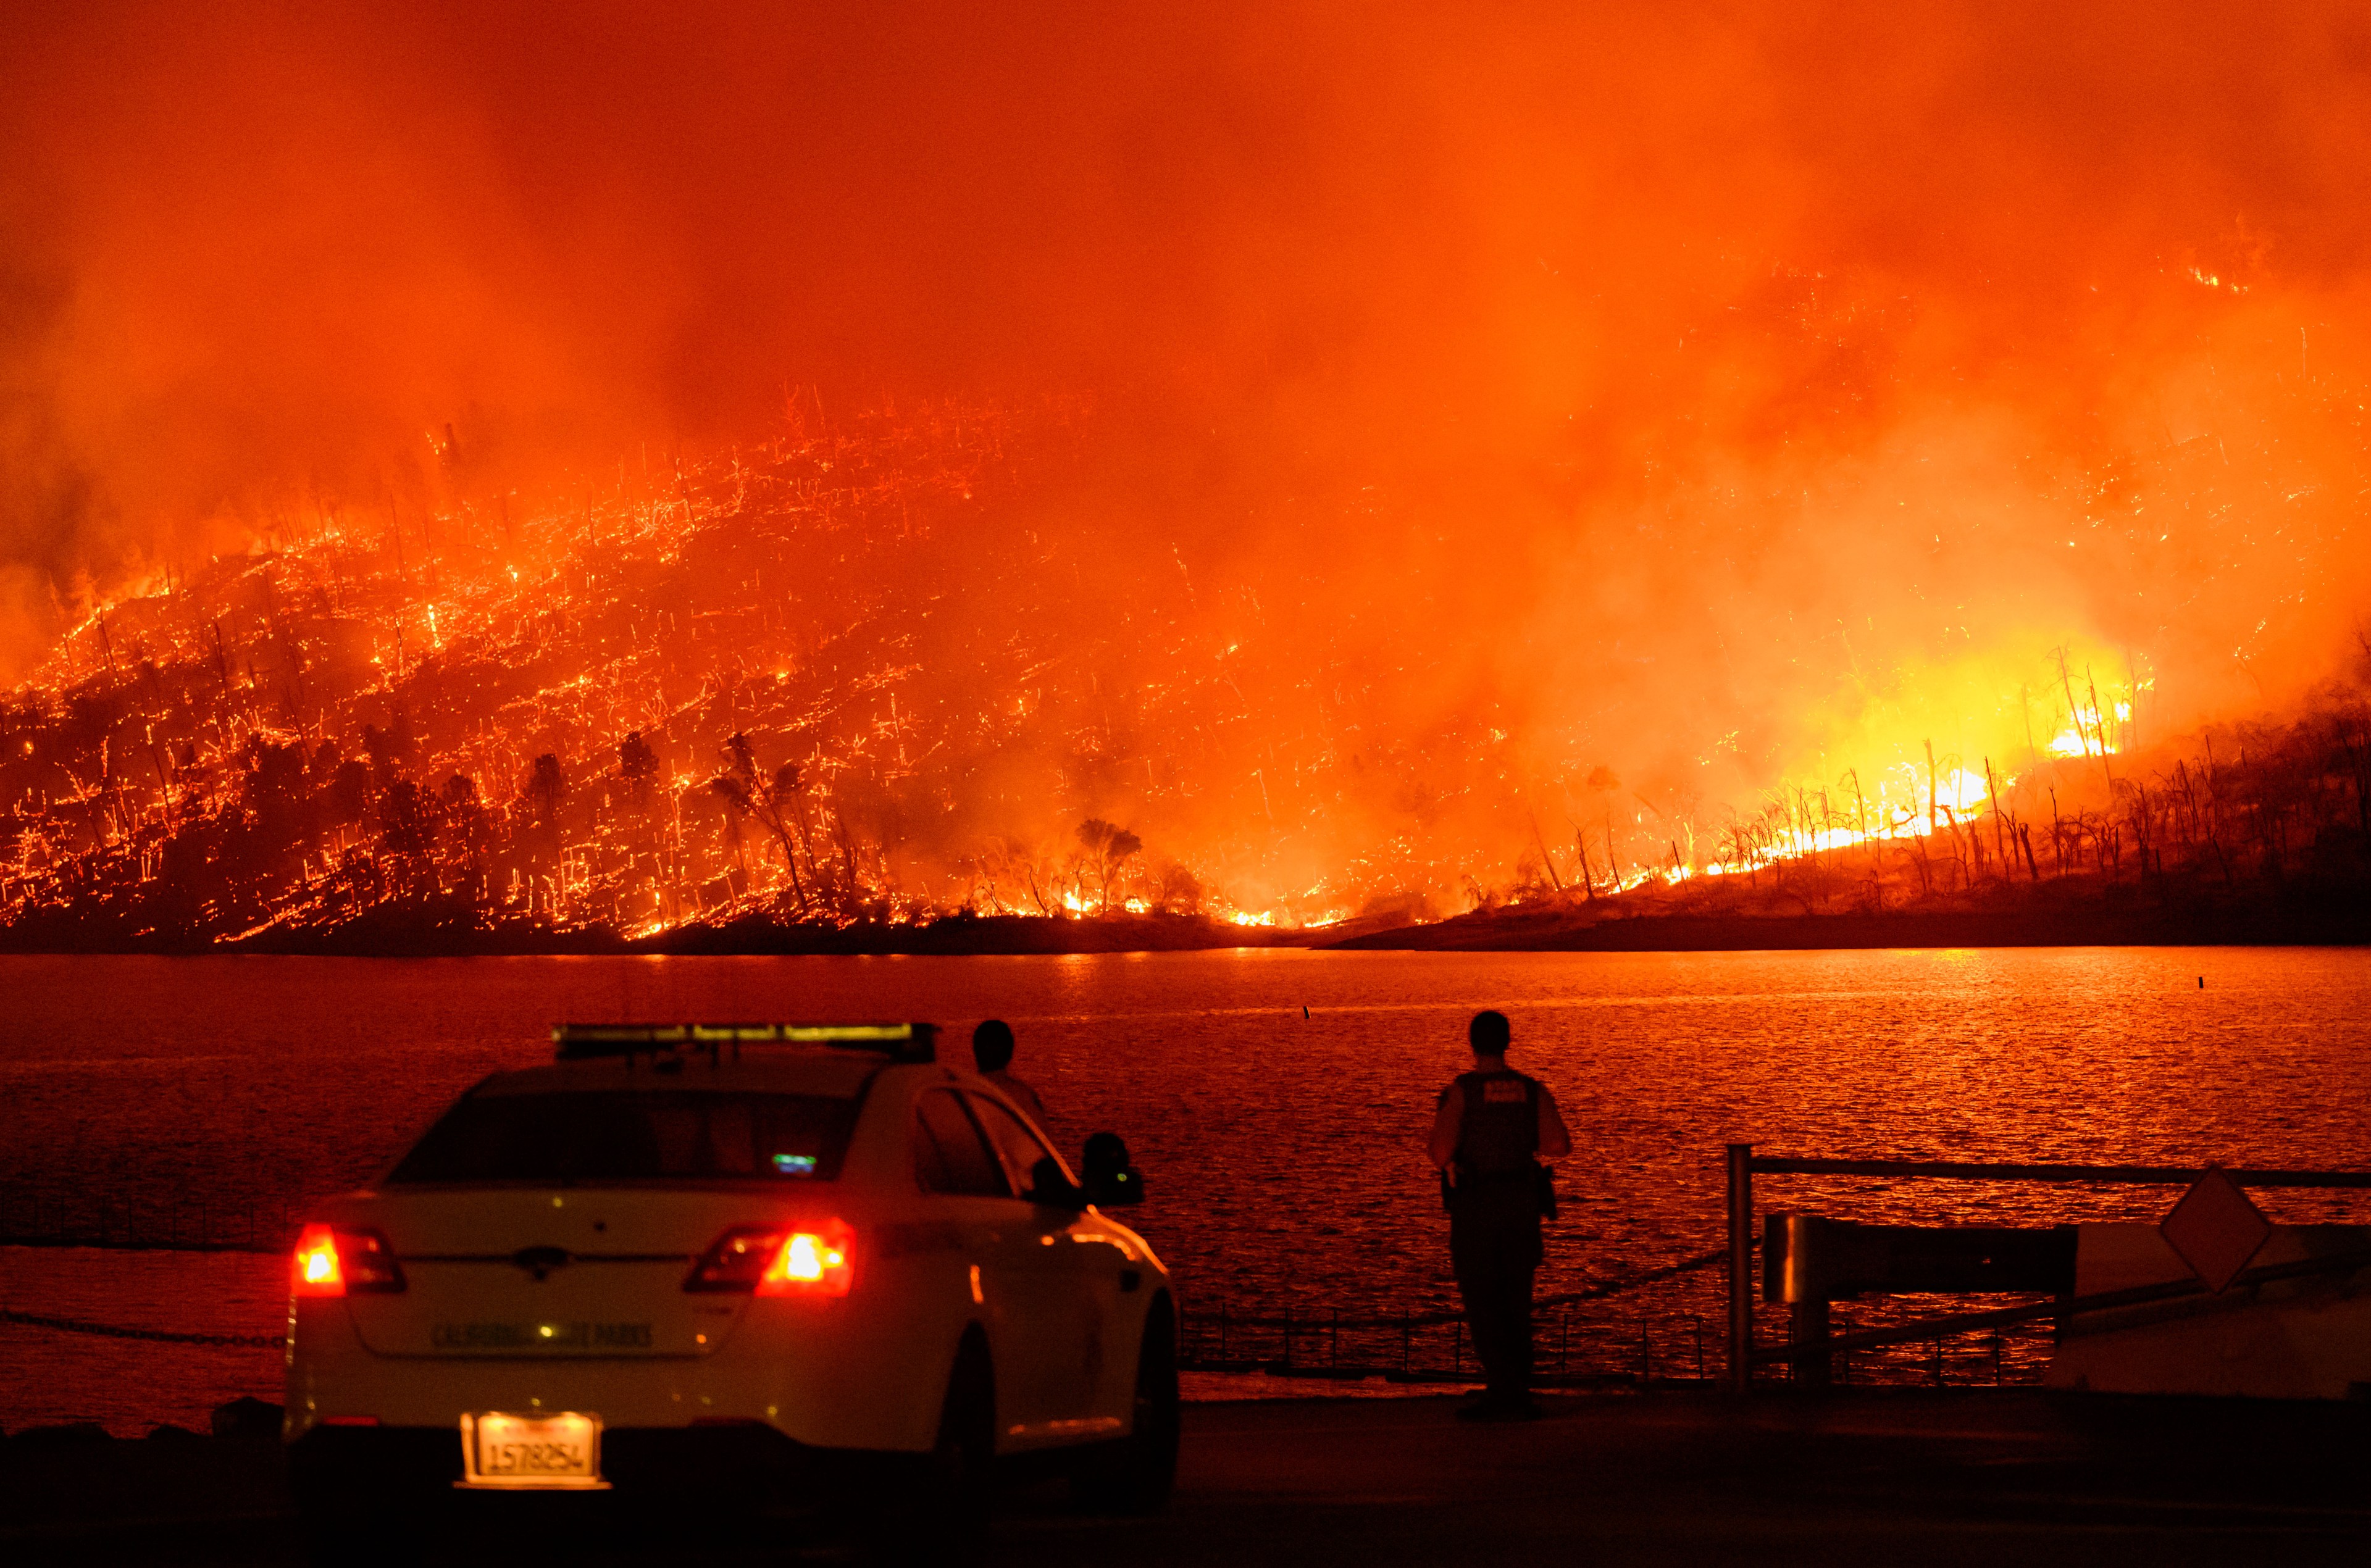 A massive wildfire engulfs a hillside, casting an orange glow across the sky and reflecting off a body of water. Emergency personnel and a vehicle are in the foreground.